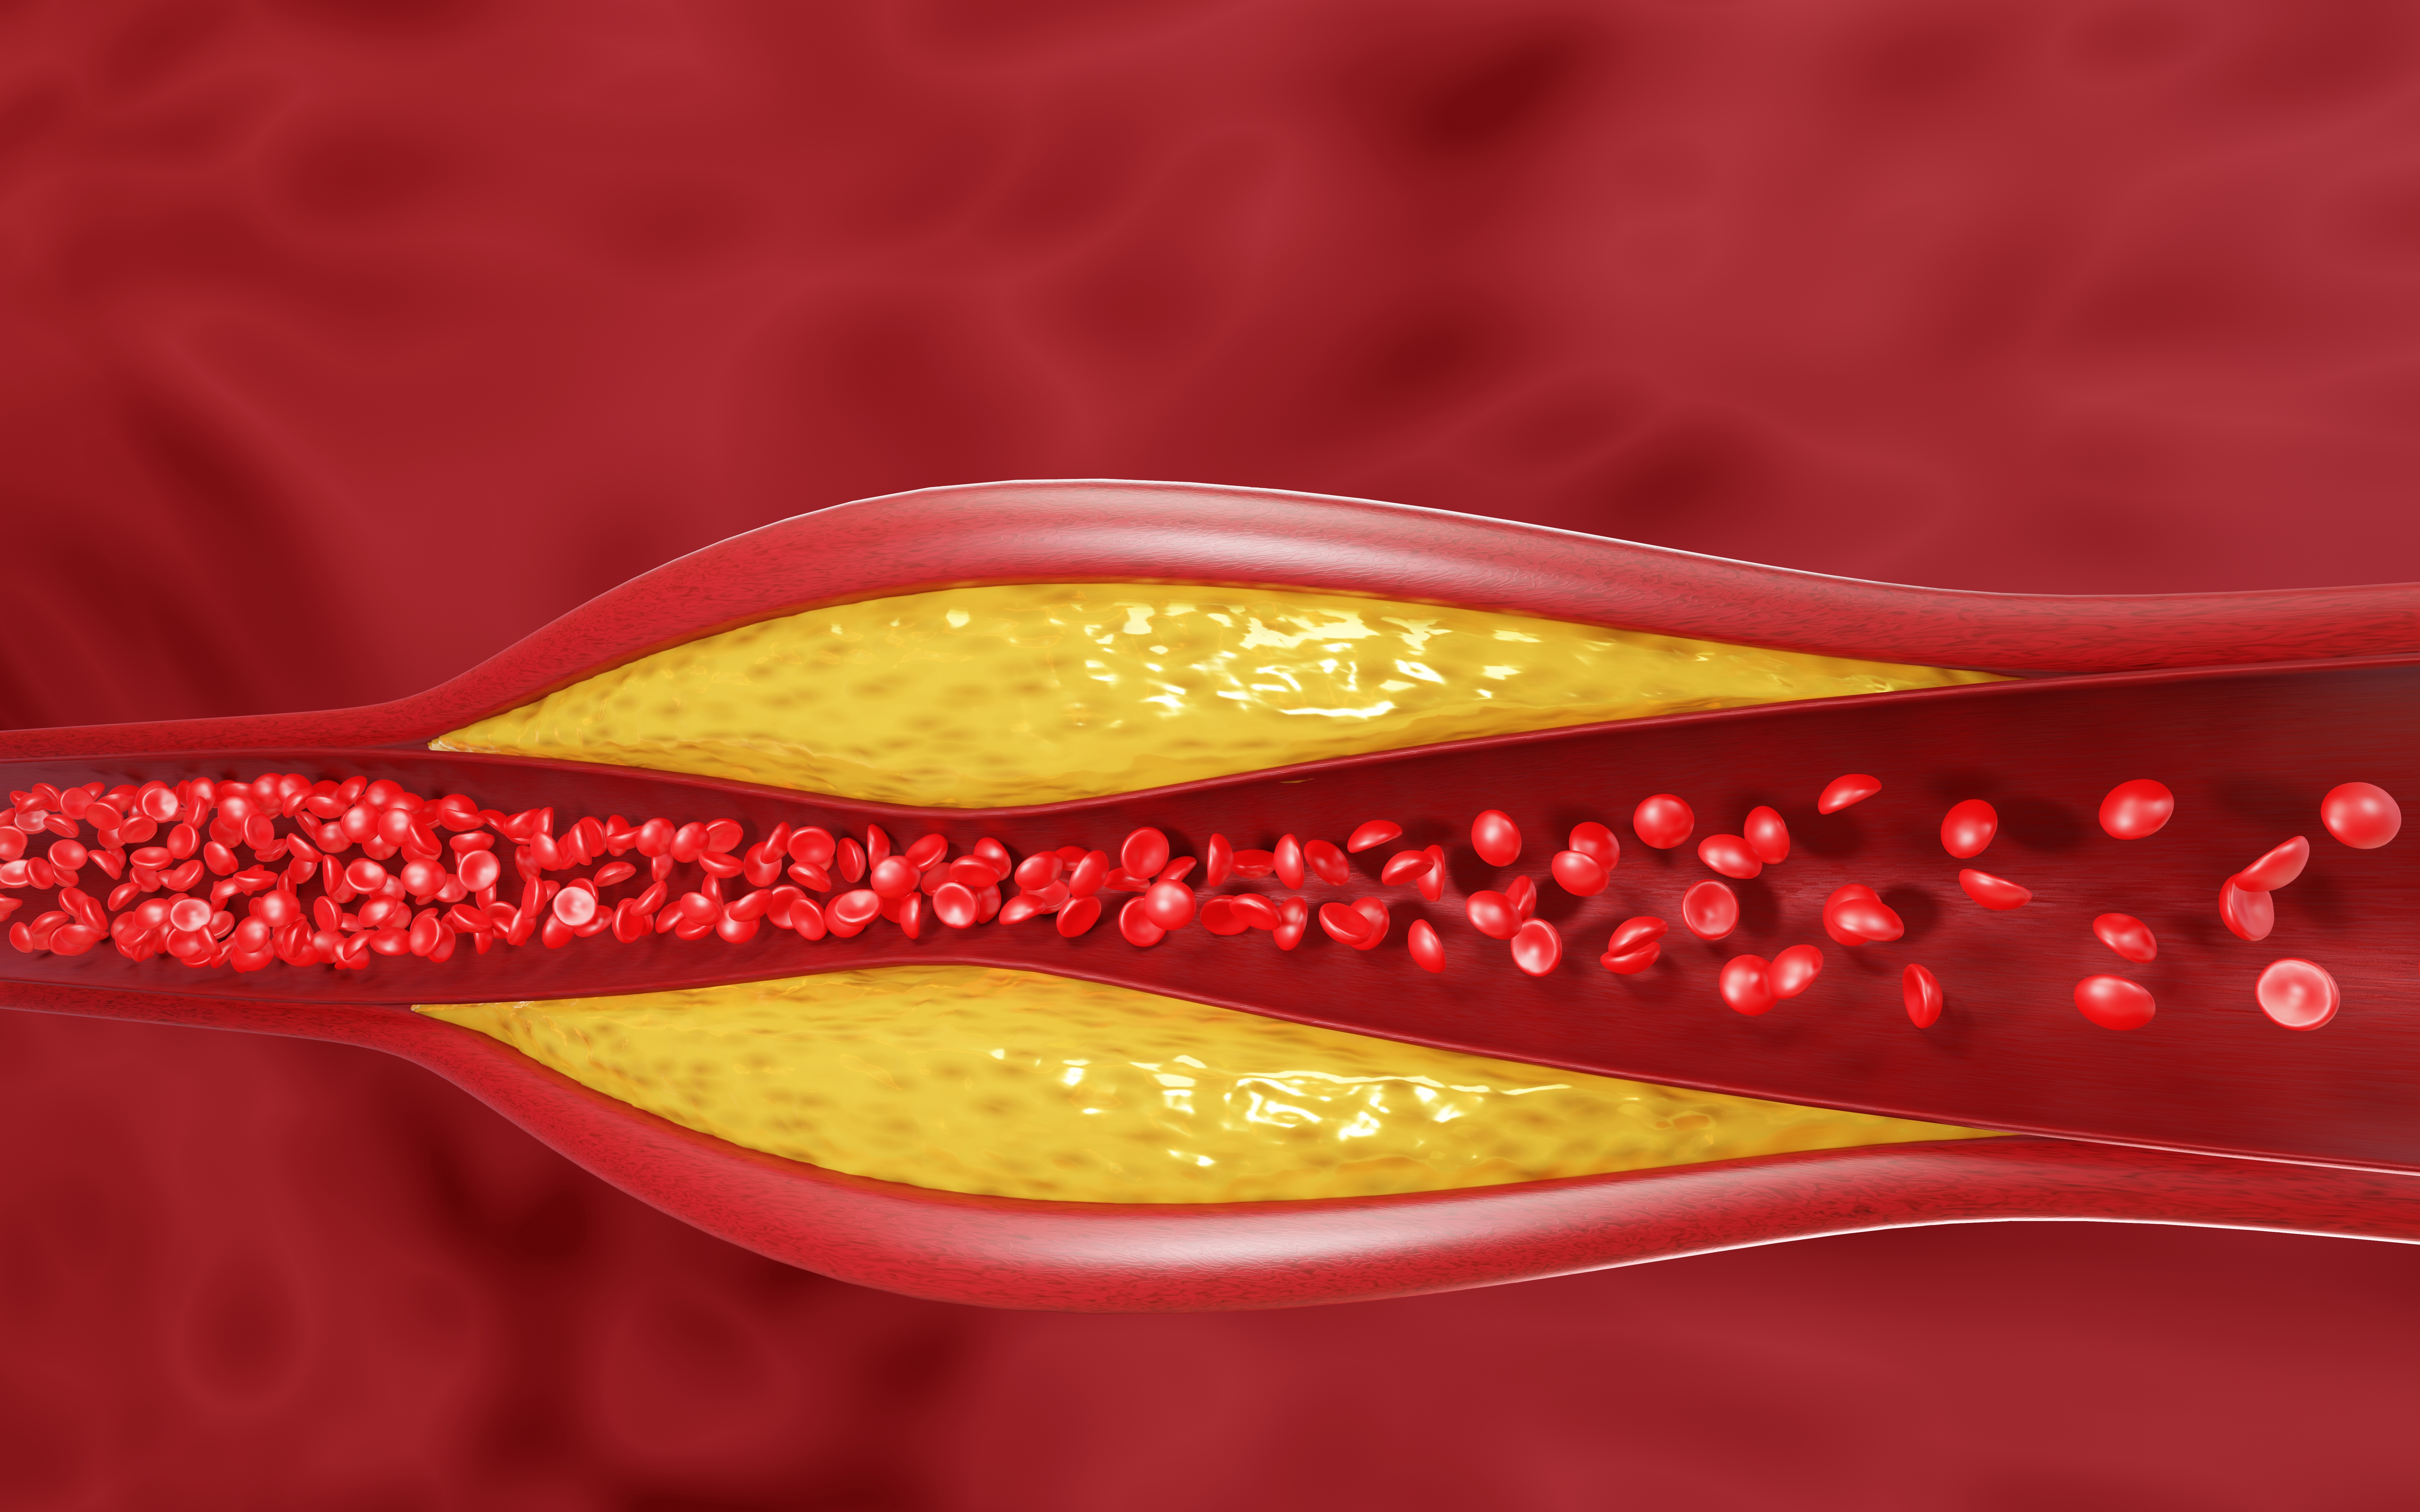 Hyperlipidemia: What Is, Causes, Treatment, and More